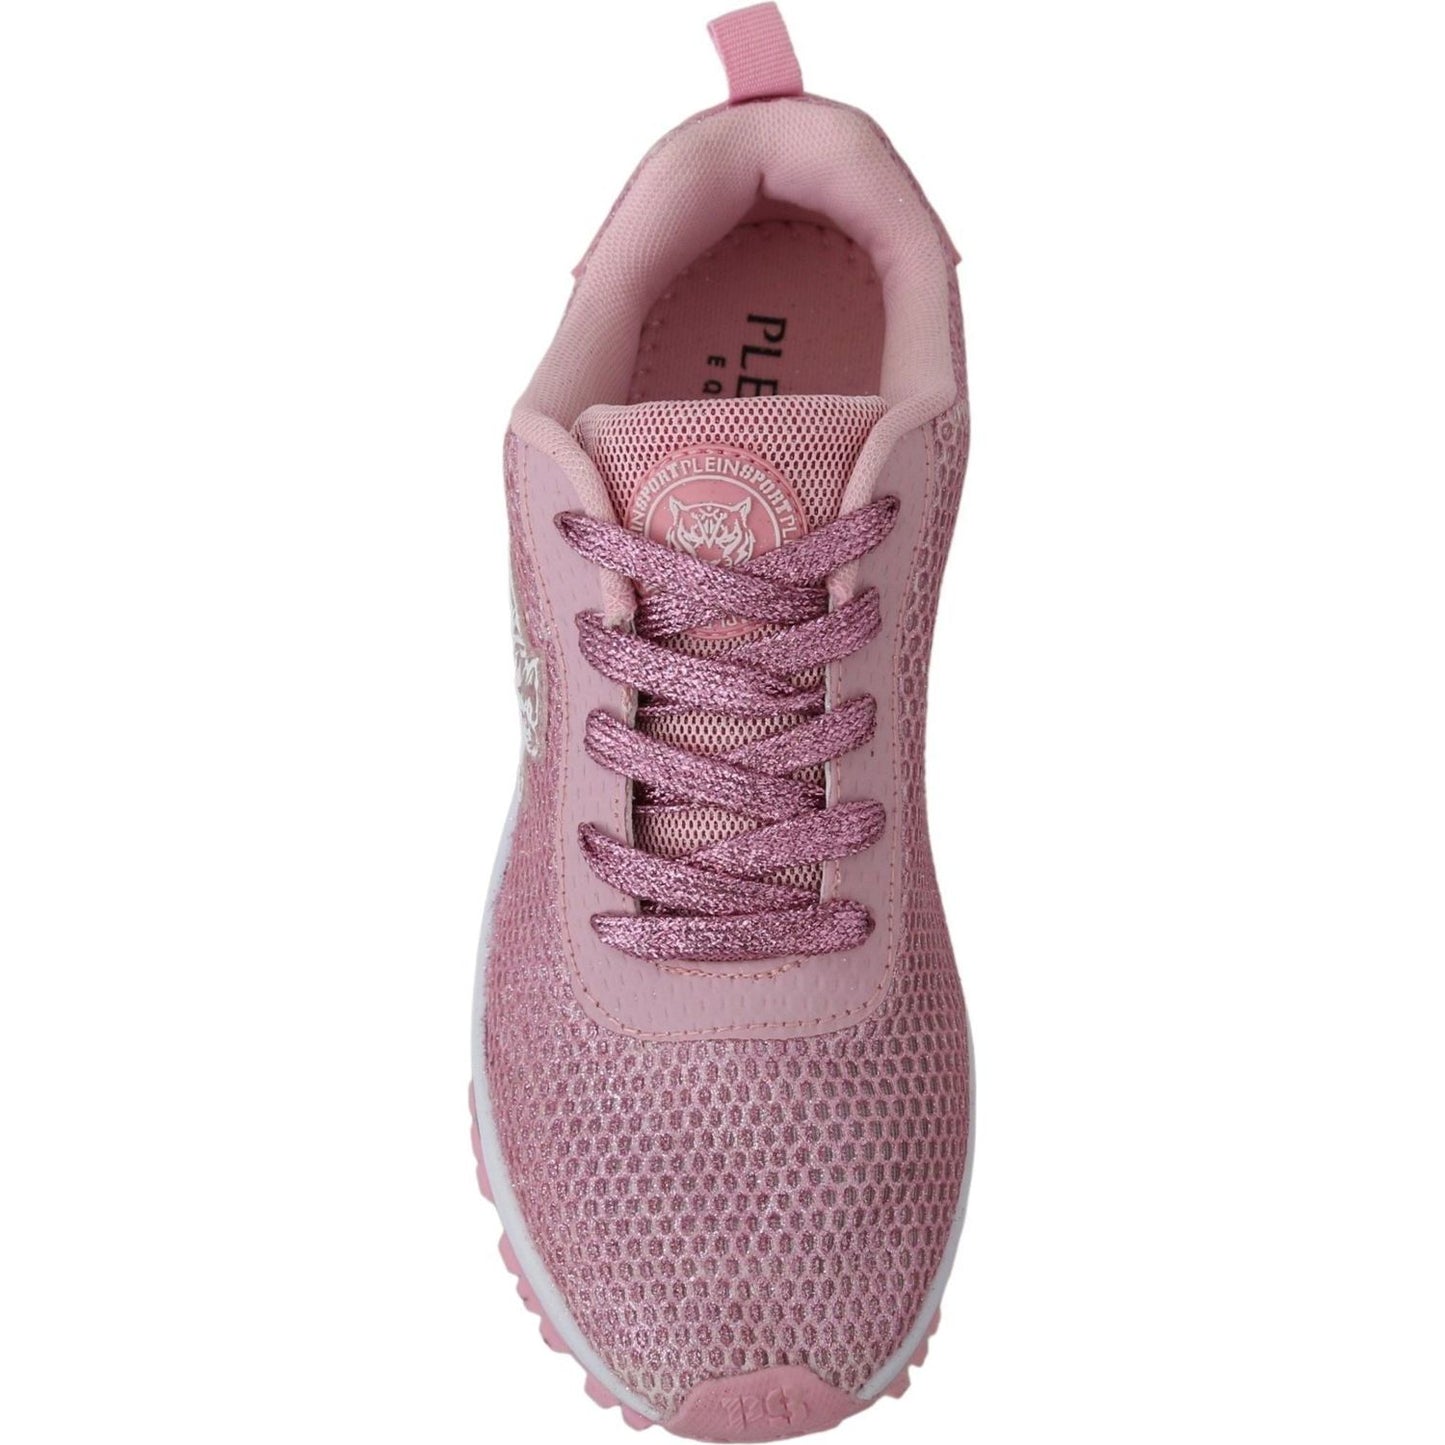 Plein Sport Chic Powder Pink High-Craft Sneakers pink-blush-polyester-gretel-sneakers-shoes